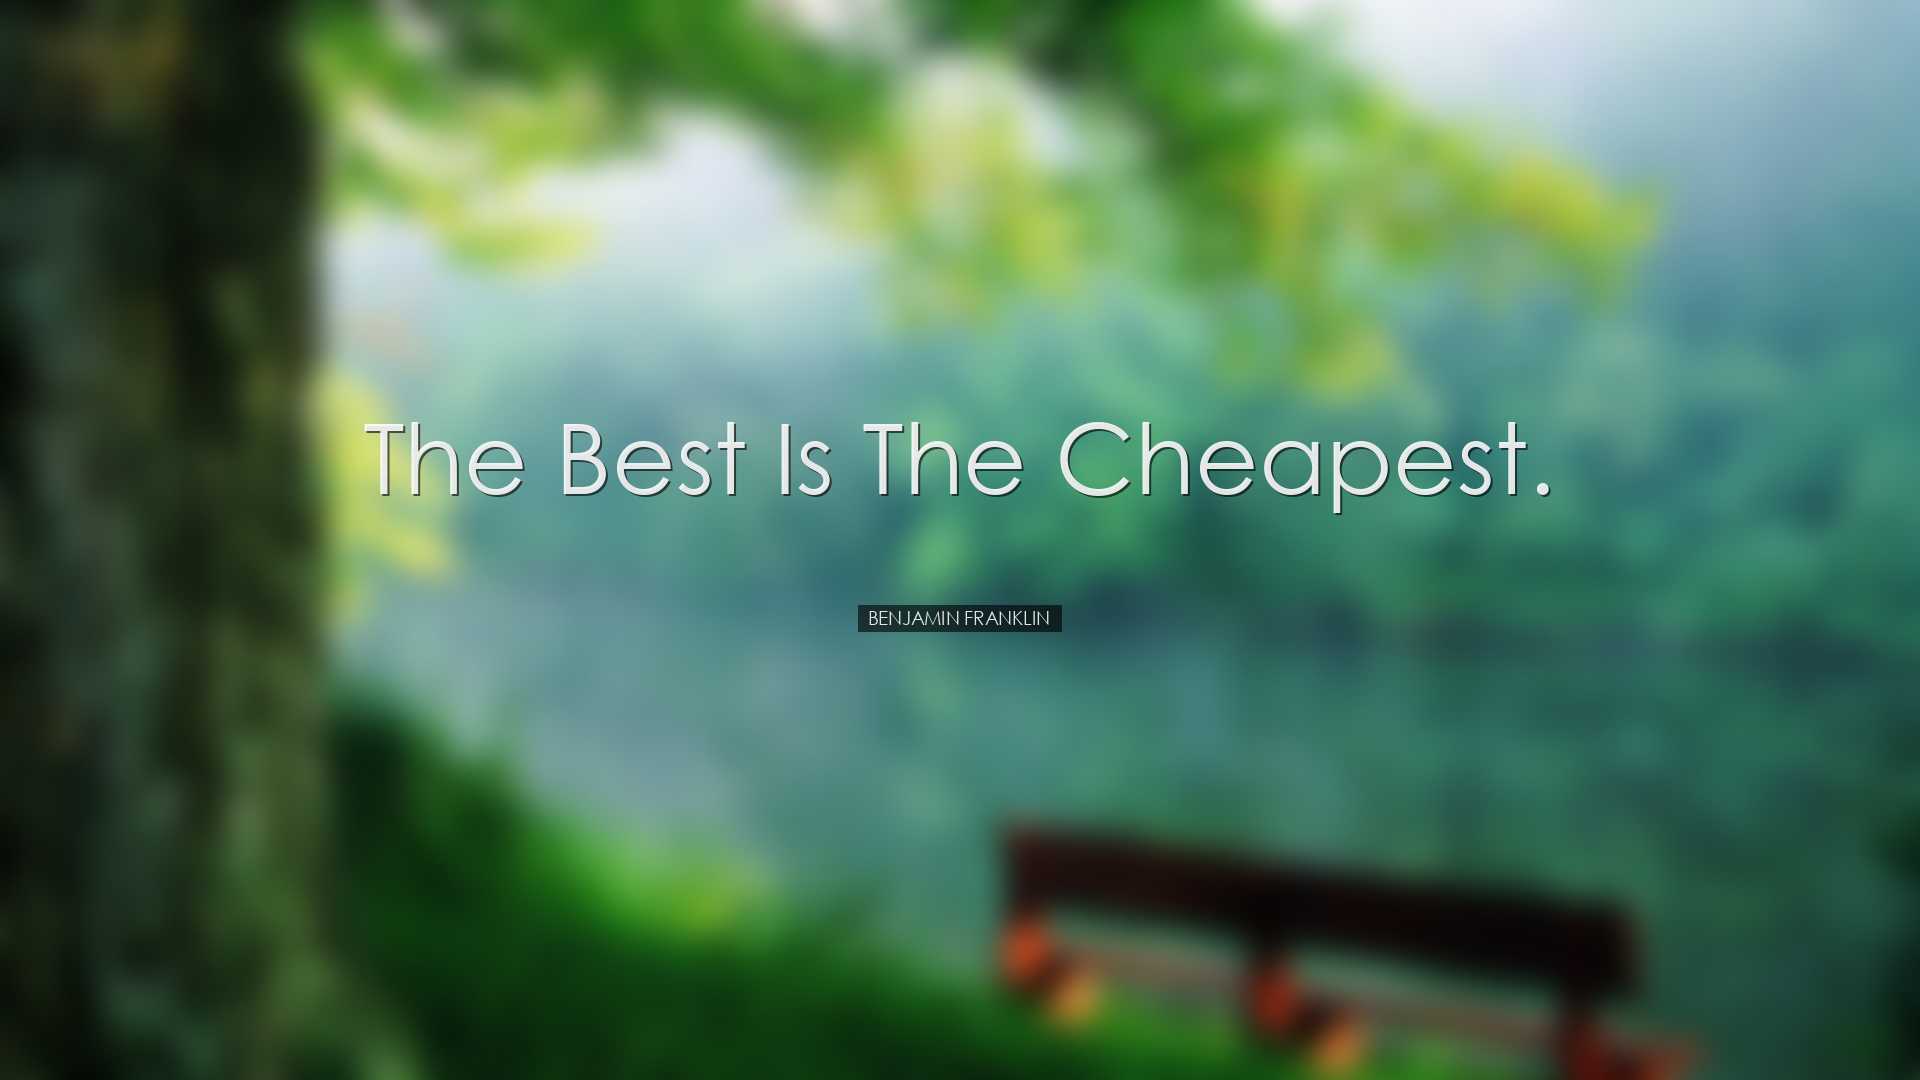 The best is the cheapest. - Benjamin Franklin